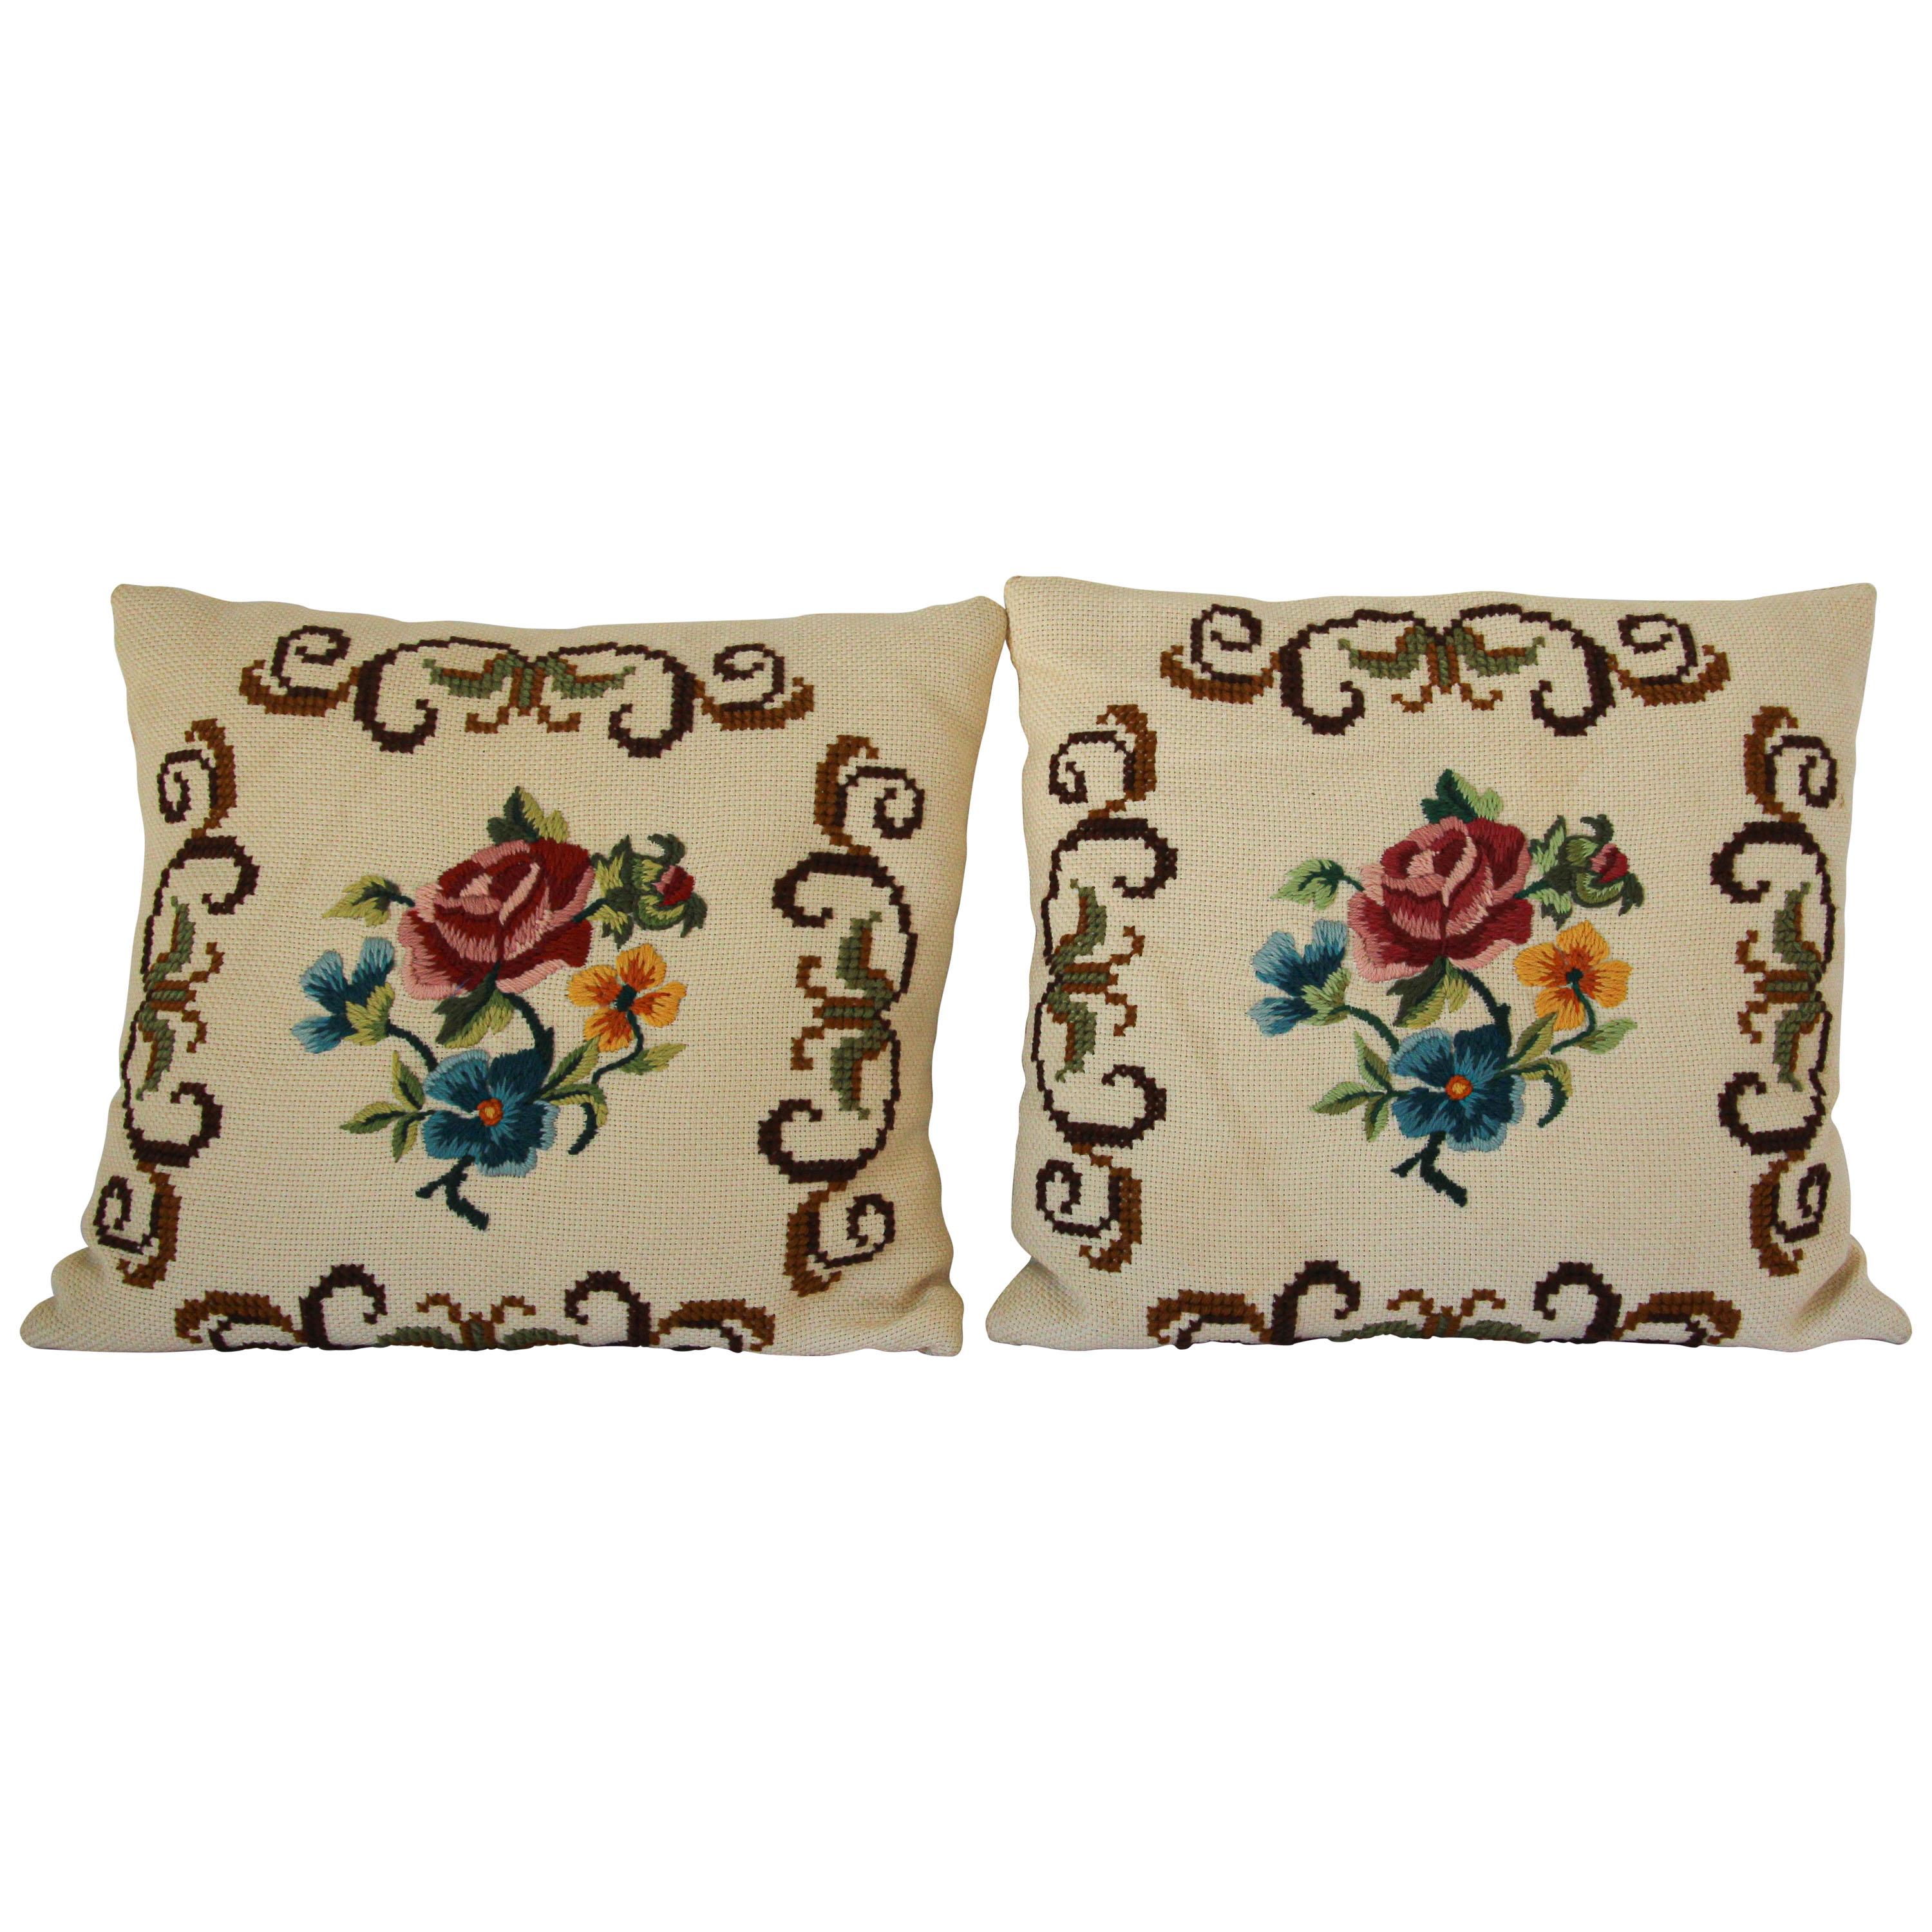 14"x 18" French Country Style Handmade Petite Point Needlepoint Pillow WM-60 